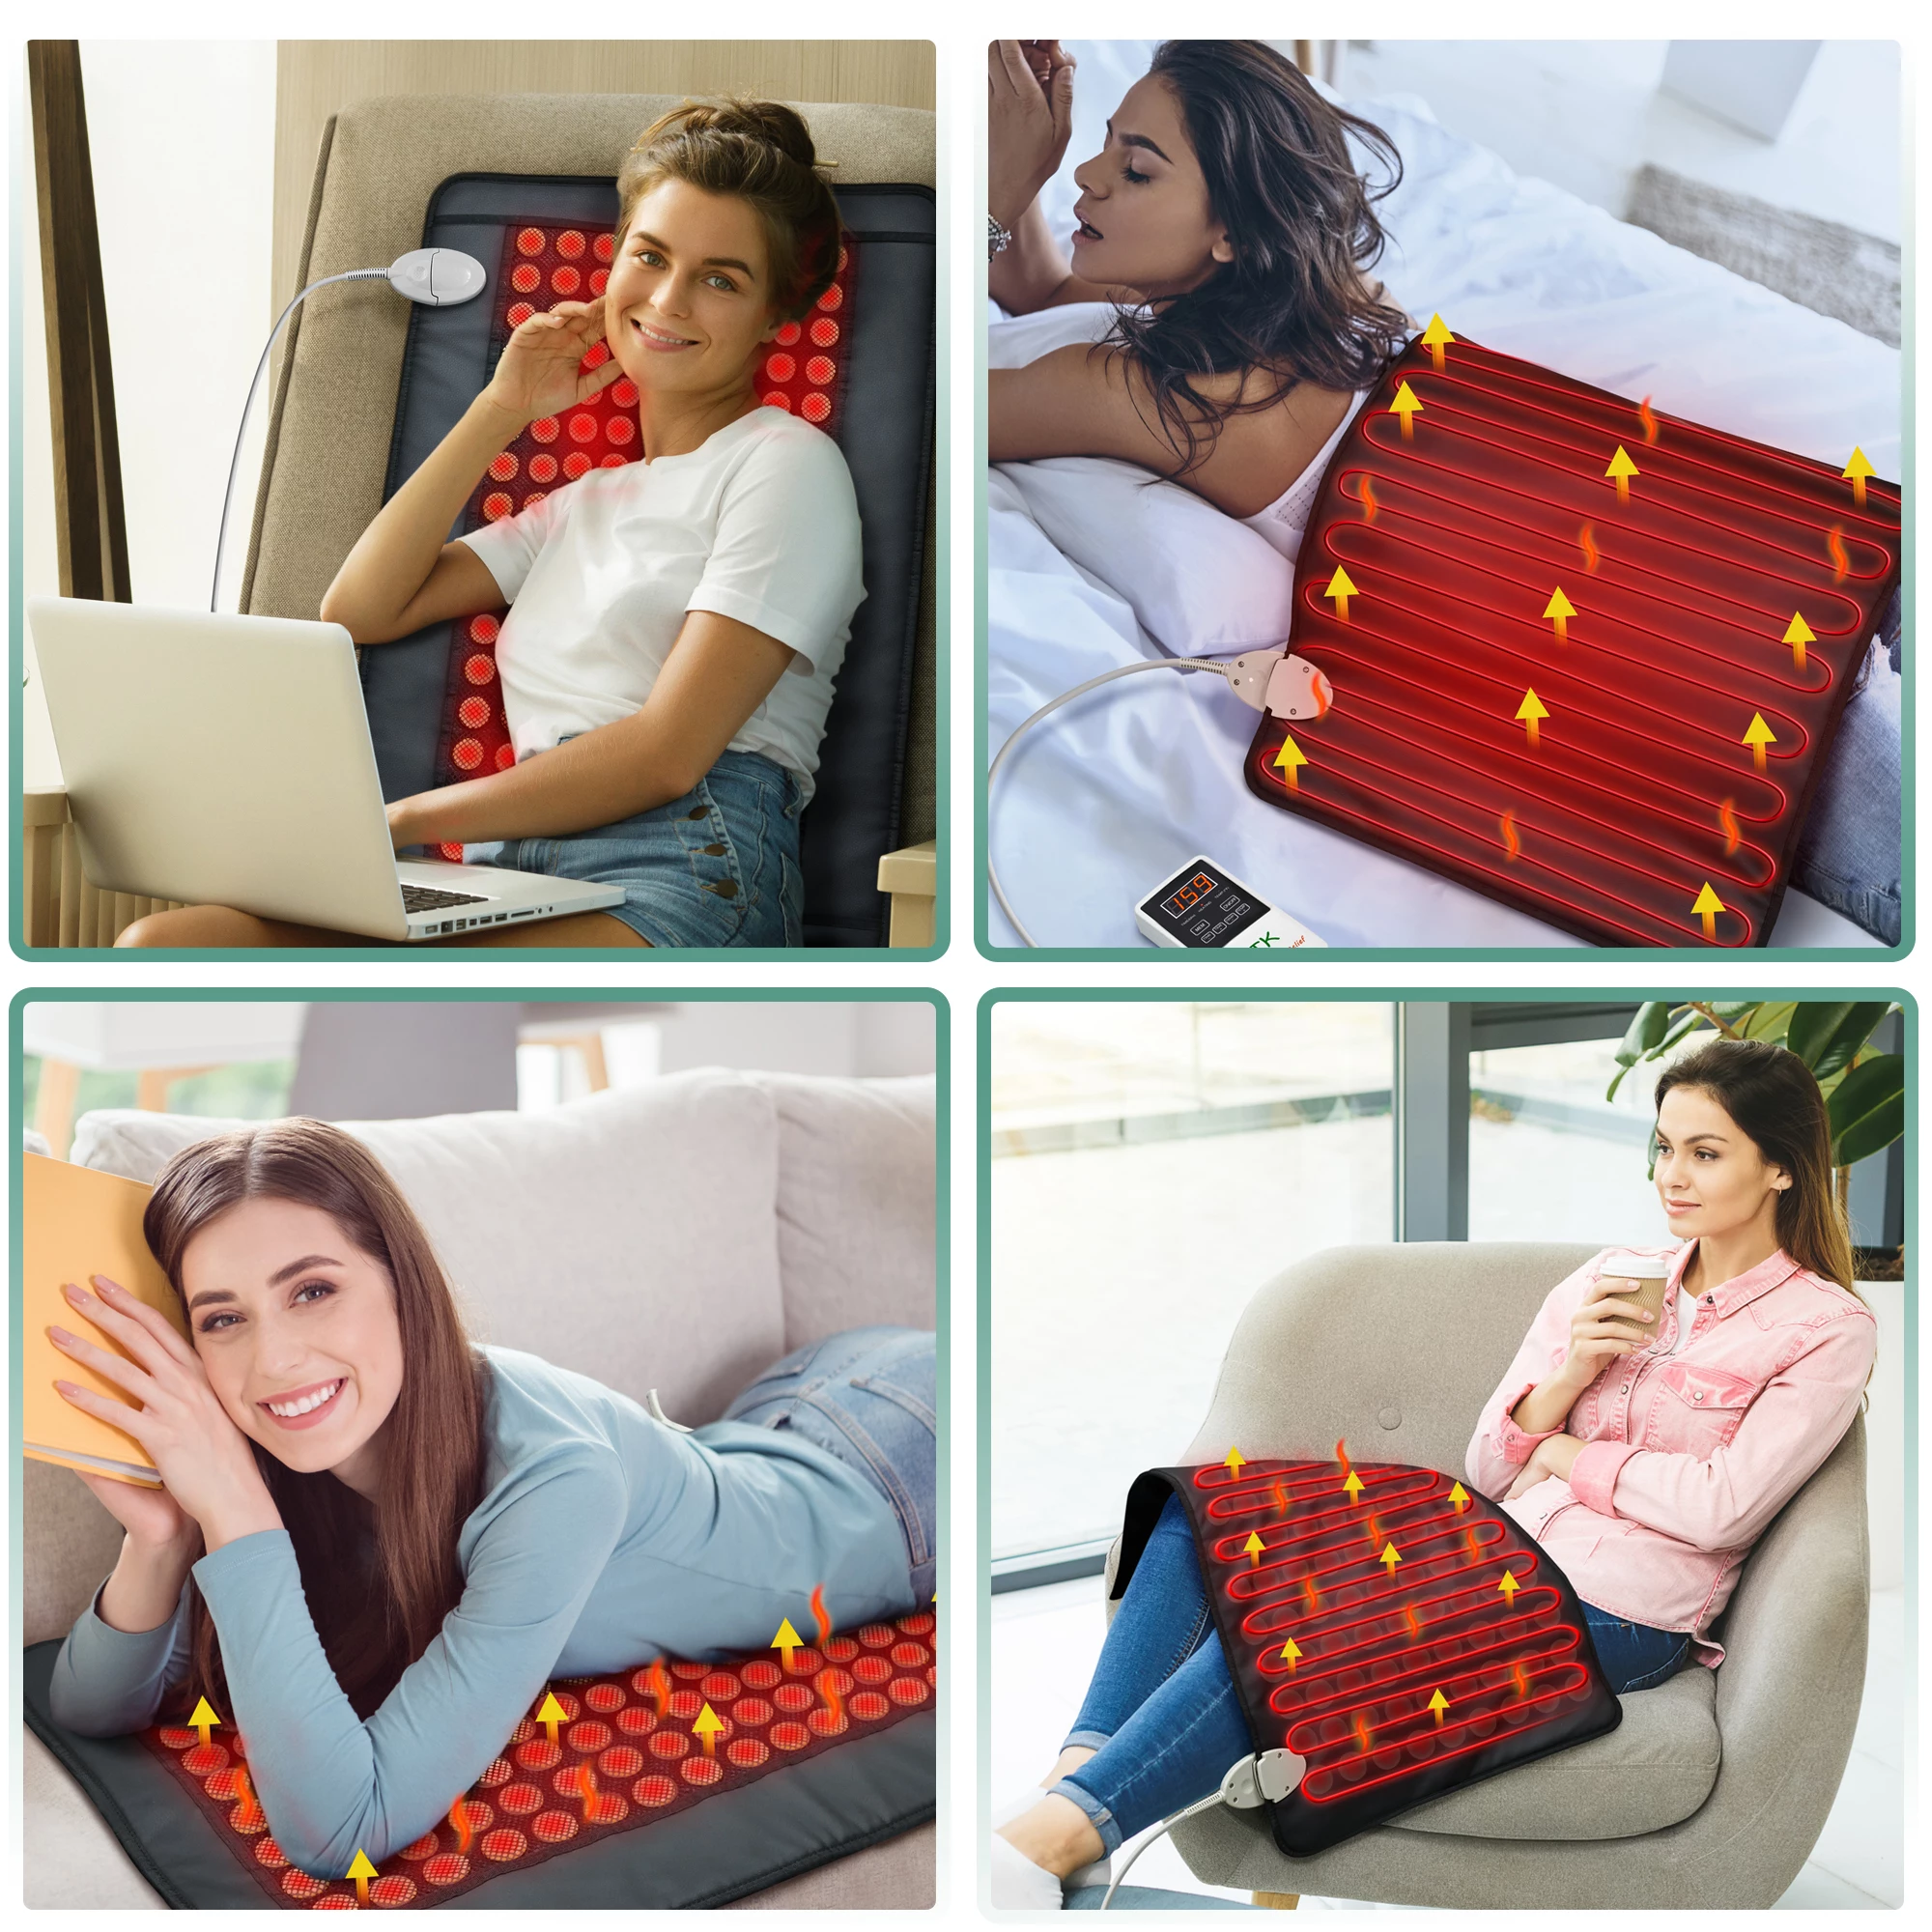 UTK Upgrade Jade Far Infrared Heating Pad for Back Pain Relief, Infrared Hot Therapy - Medium [21x31], 153 Jade Stones, Adjustable Temp, Auto Off and Travel Bag 4